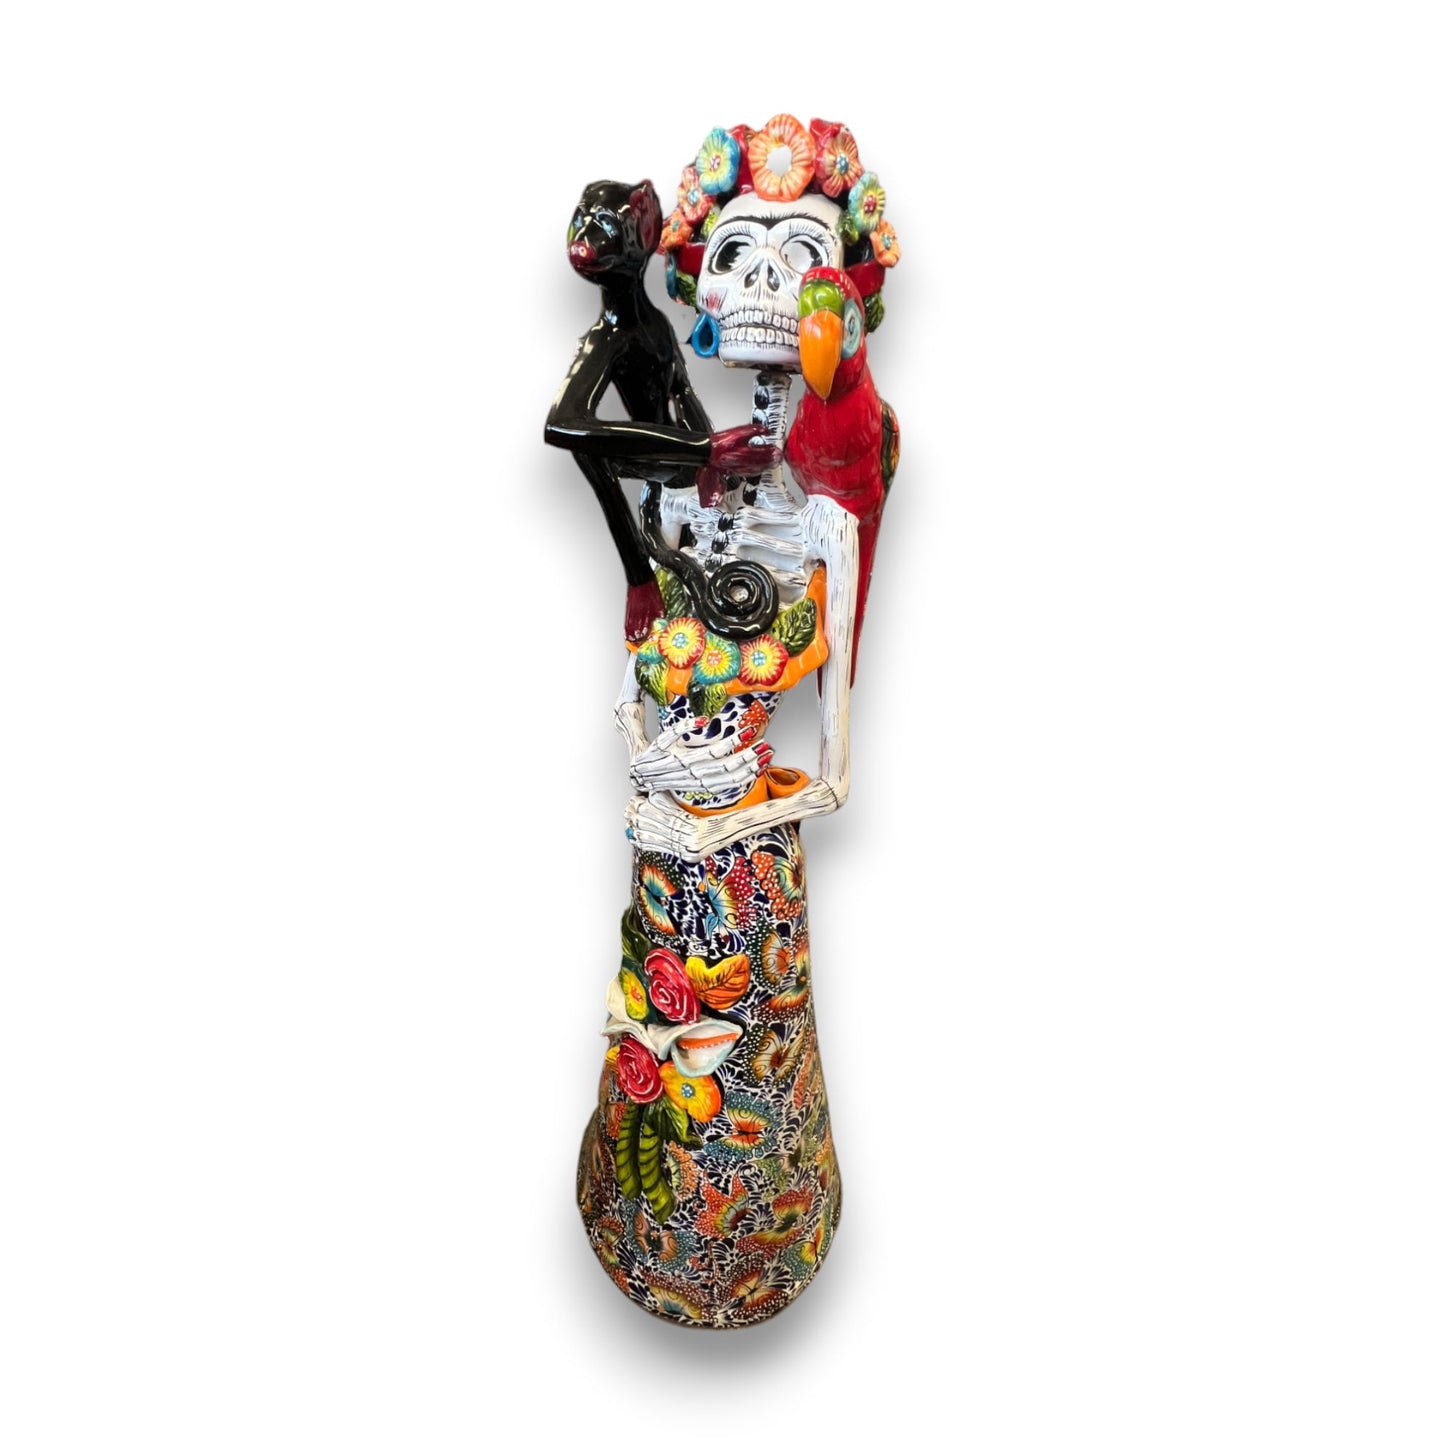 Talavera Catrina Day of the Dead Statue | Life-Sized 4'10" Figurine with Intricate Painting